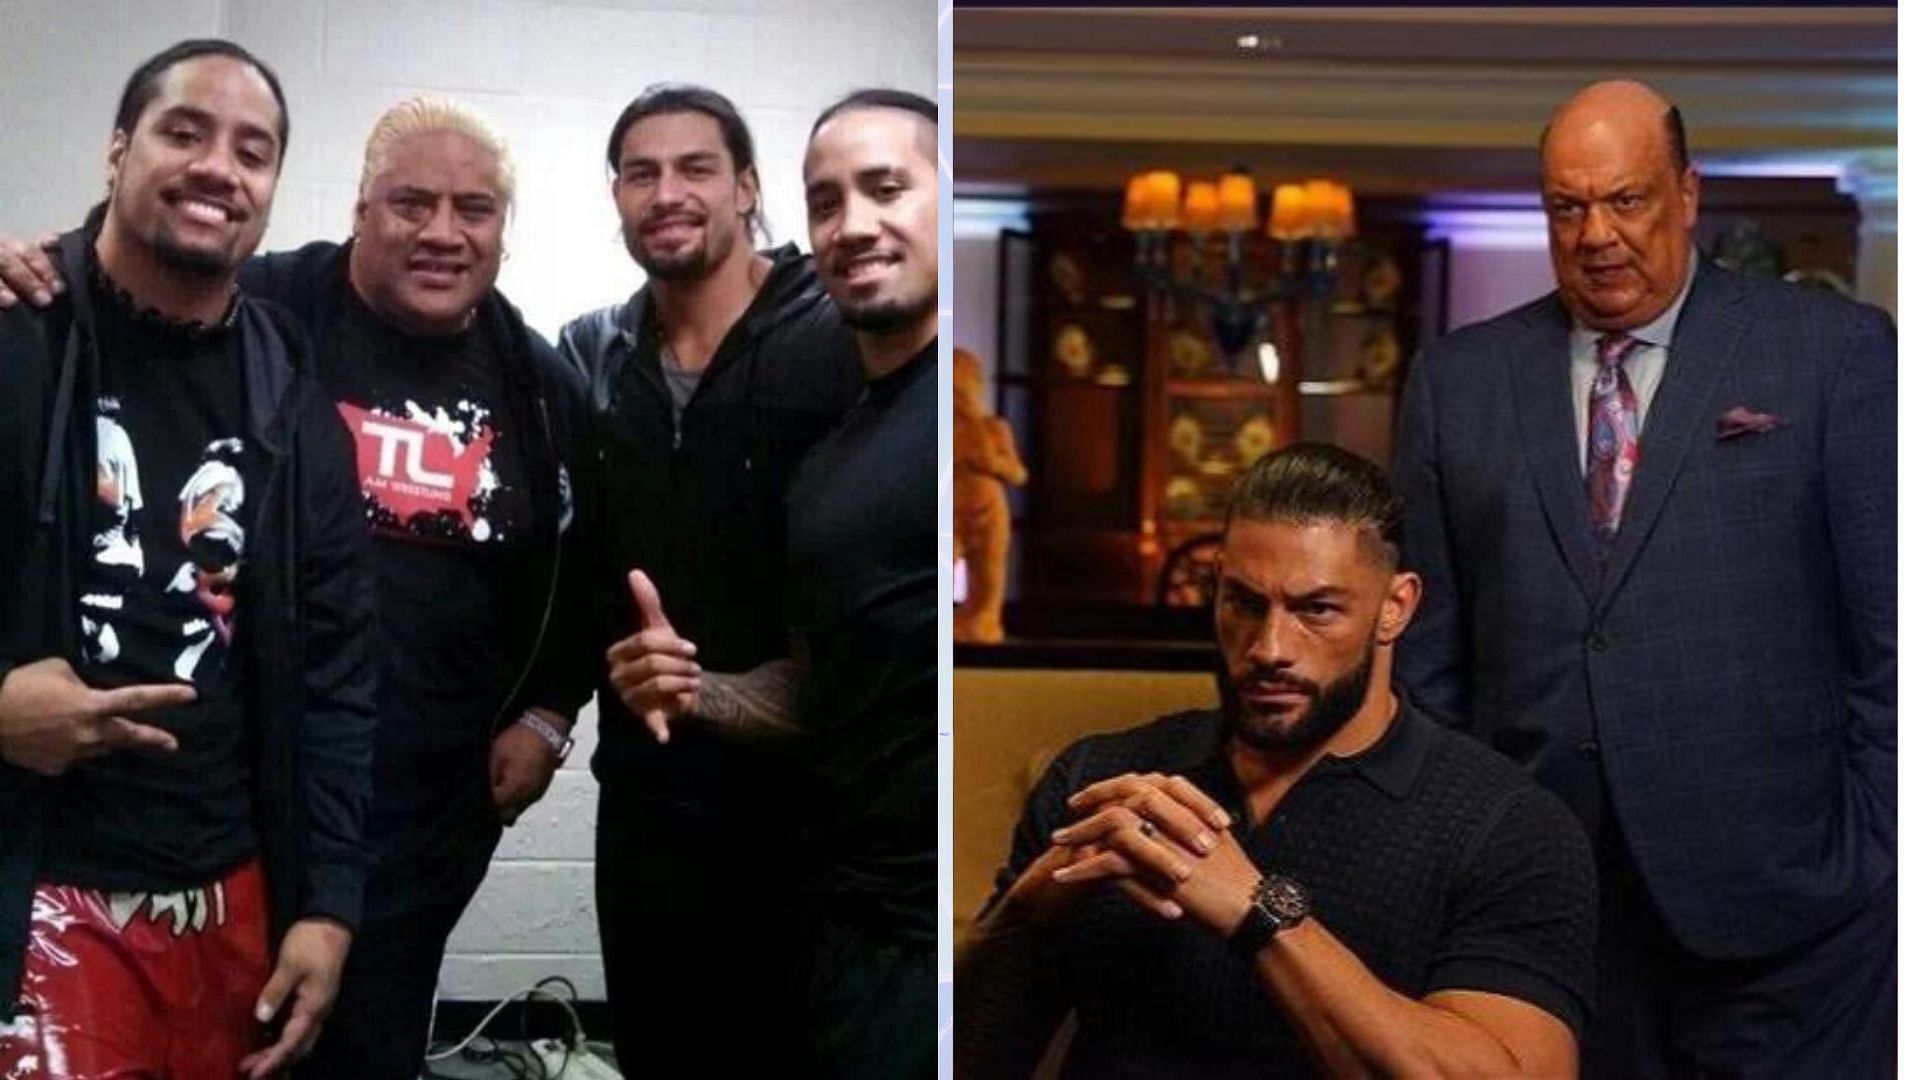 The Bloodline is one of the biggest factions in WWE